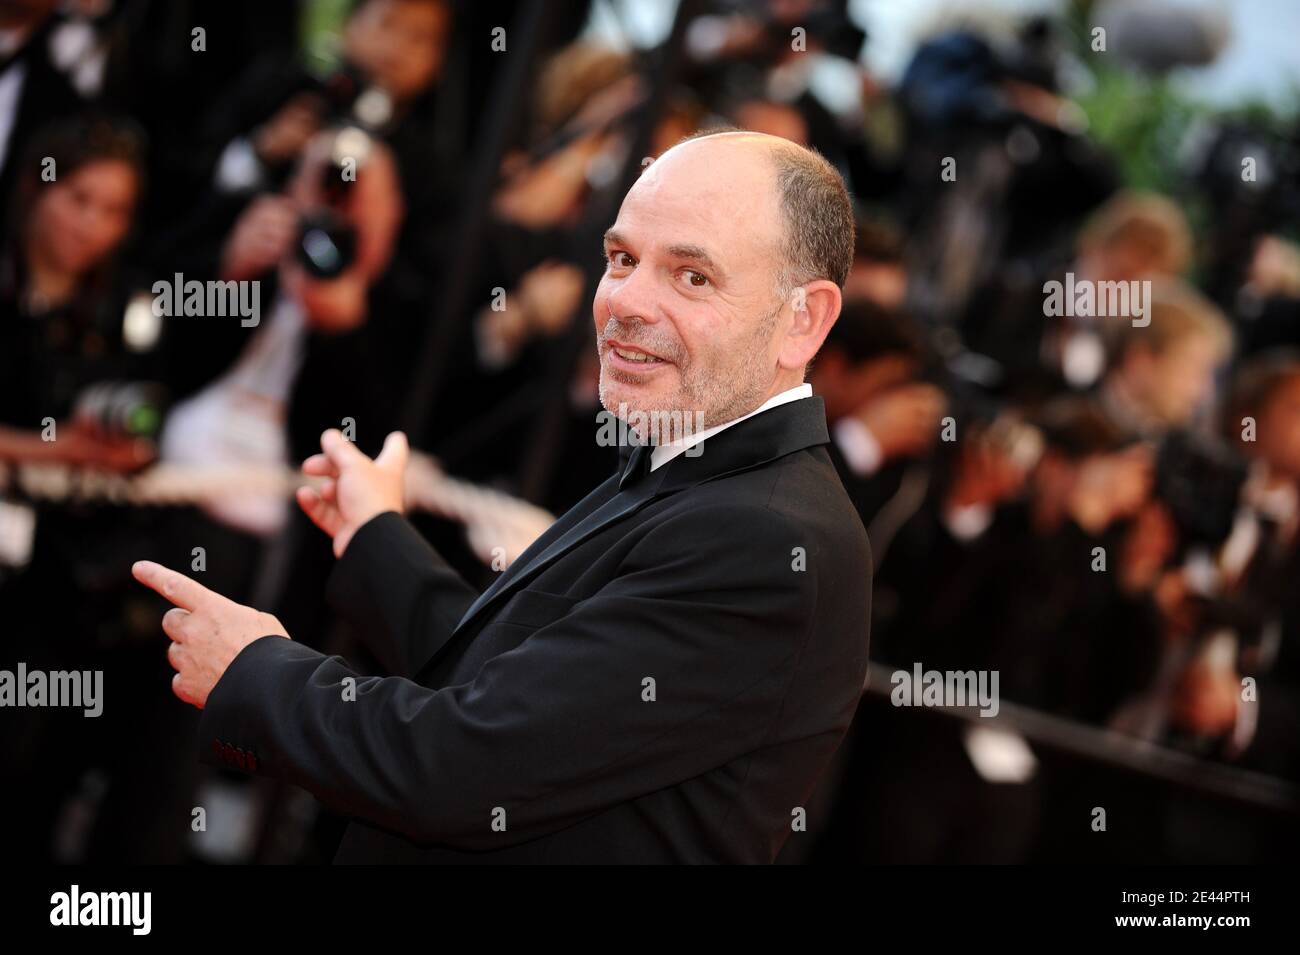 Jean-Pierre Darroussin attends the screening of Pixars Studios's 'Up' at the 62nd Cannes Film Festival in Cannes, France on May 13, 2009. Photo by Lionel Hahn/ABACAPRESS.COM Stock Photo